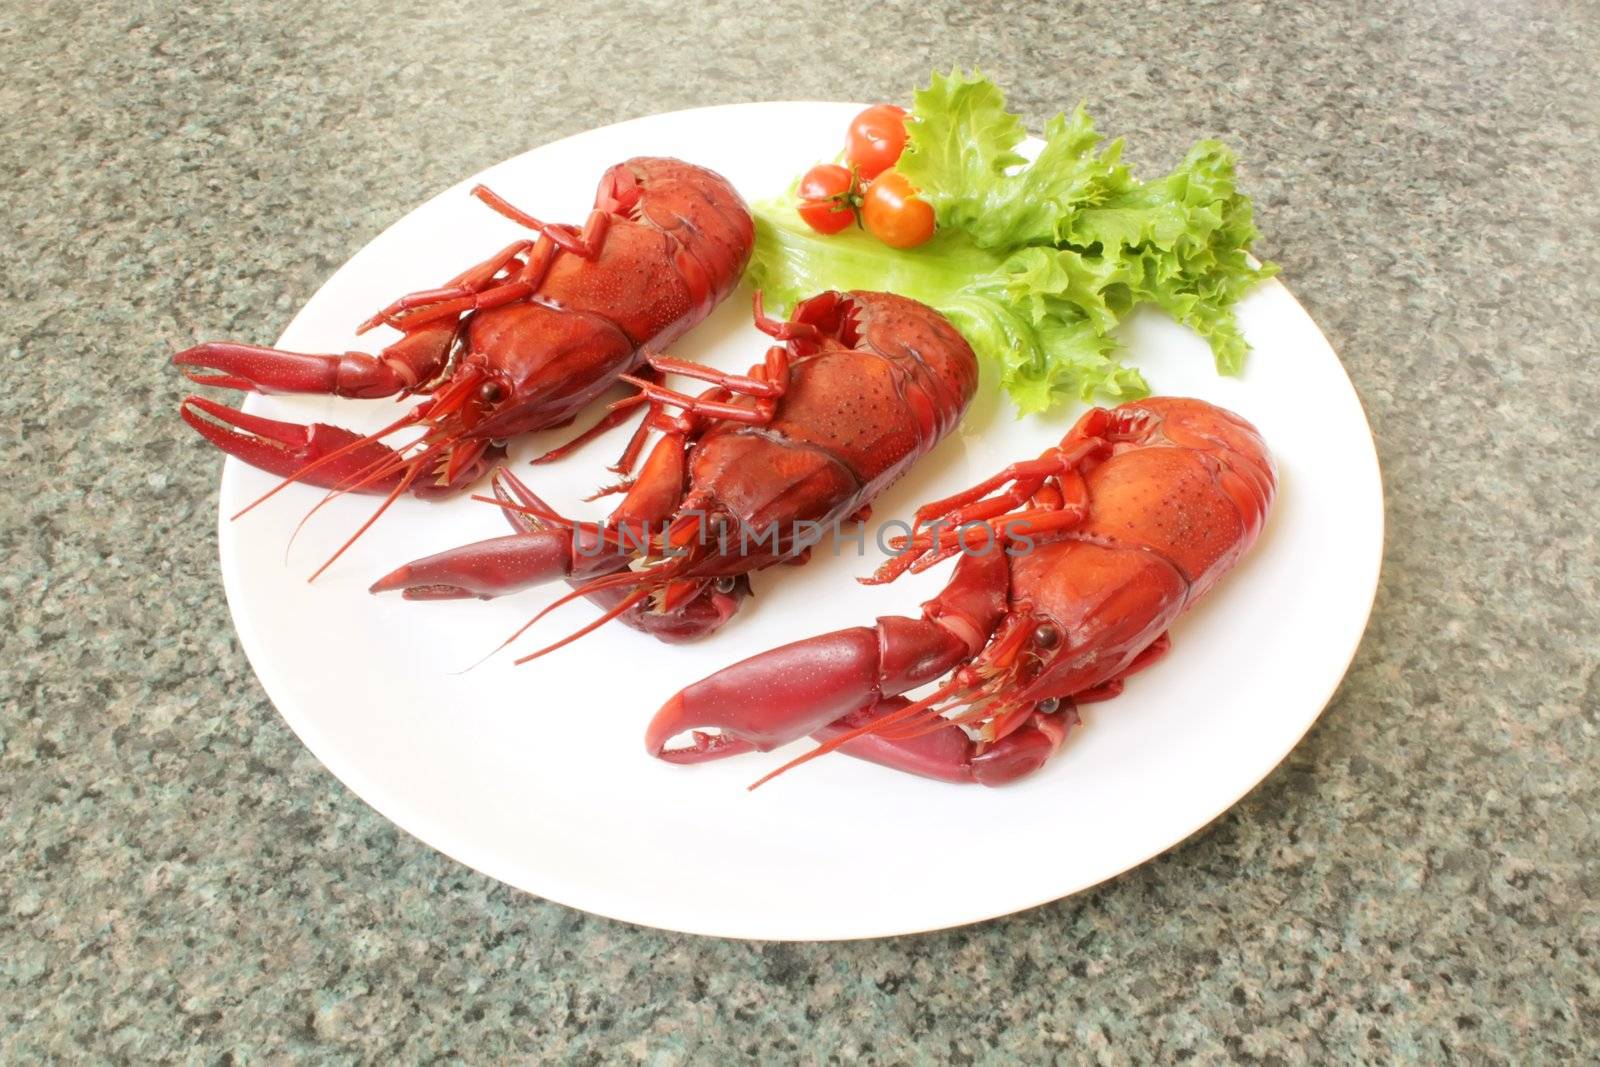 Crawfish Cooked Shellfish Serving as a Meal